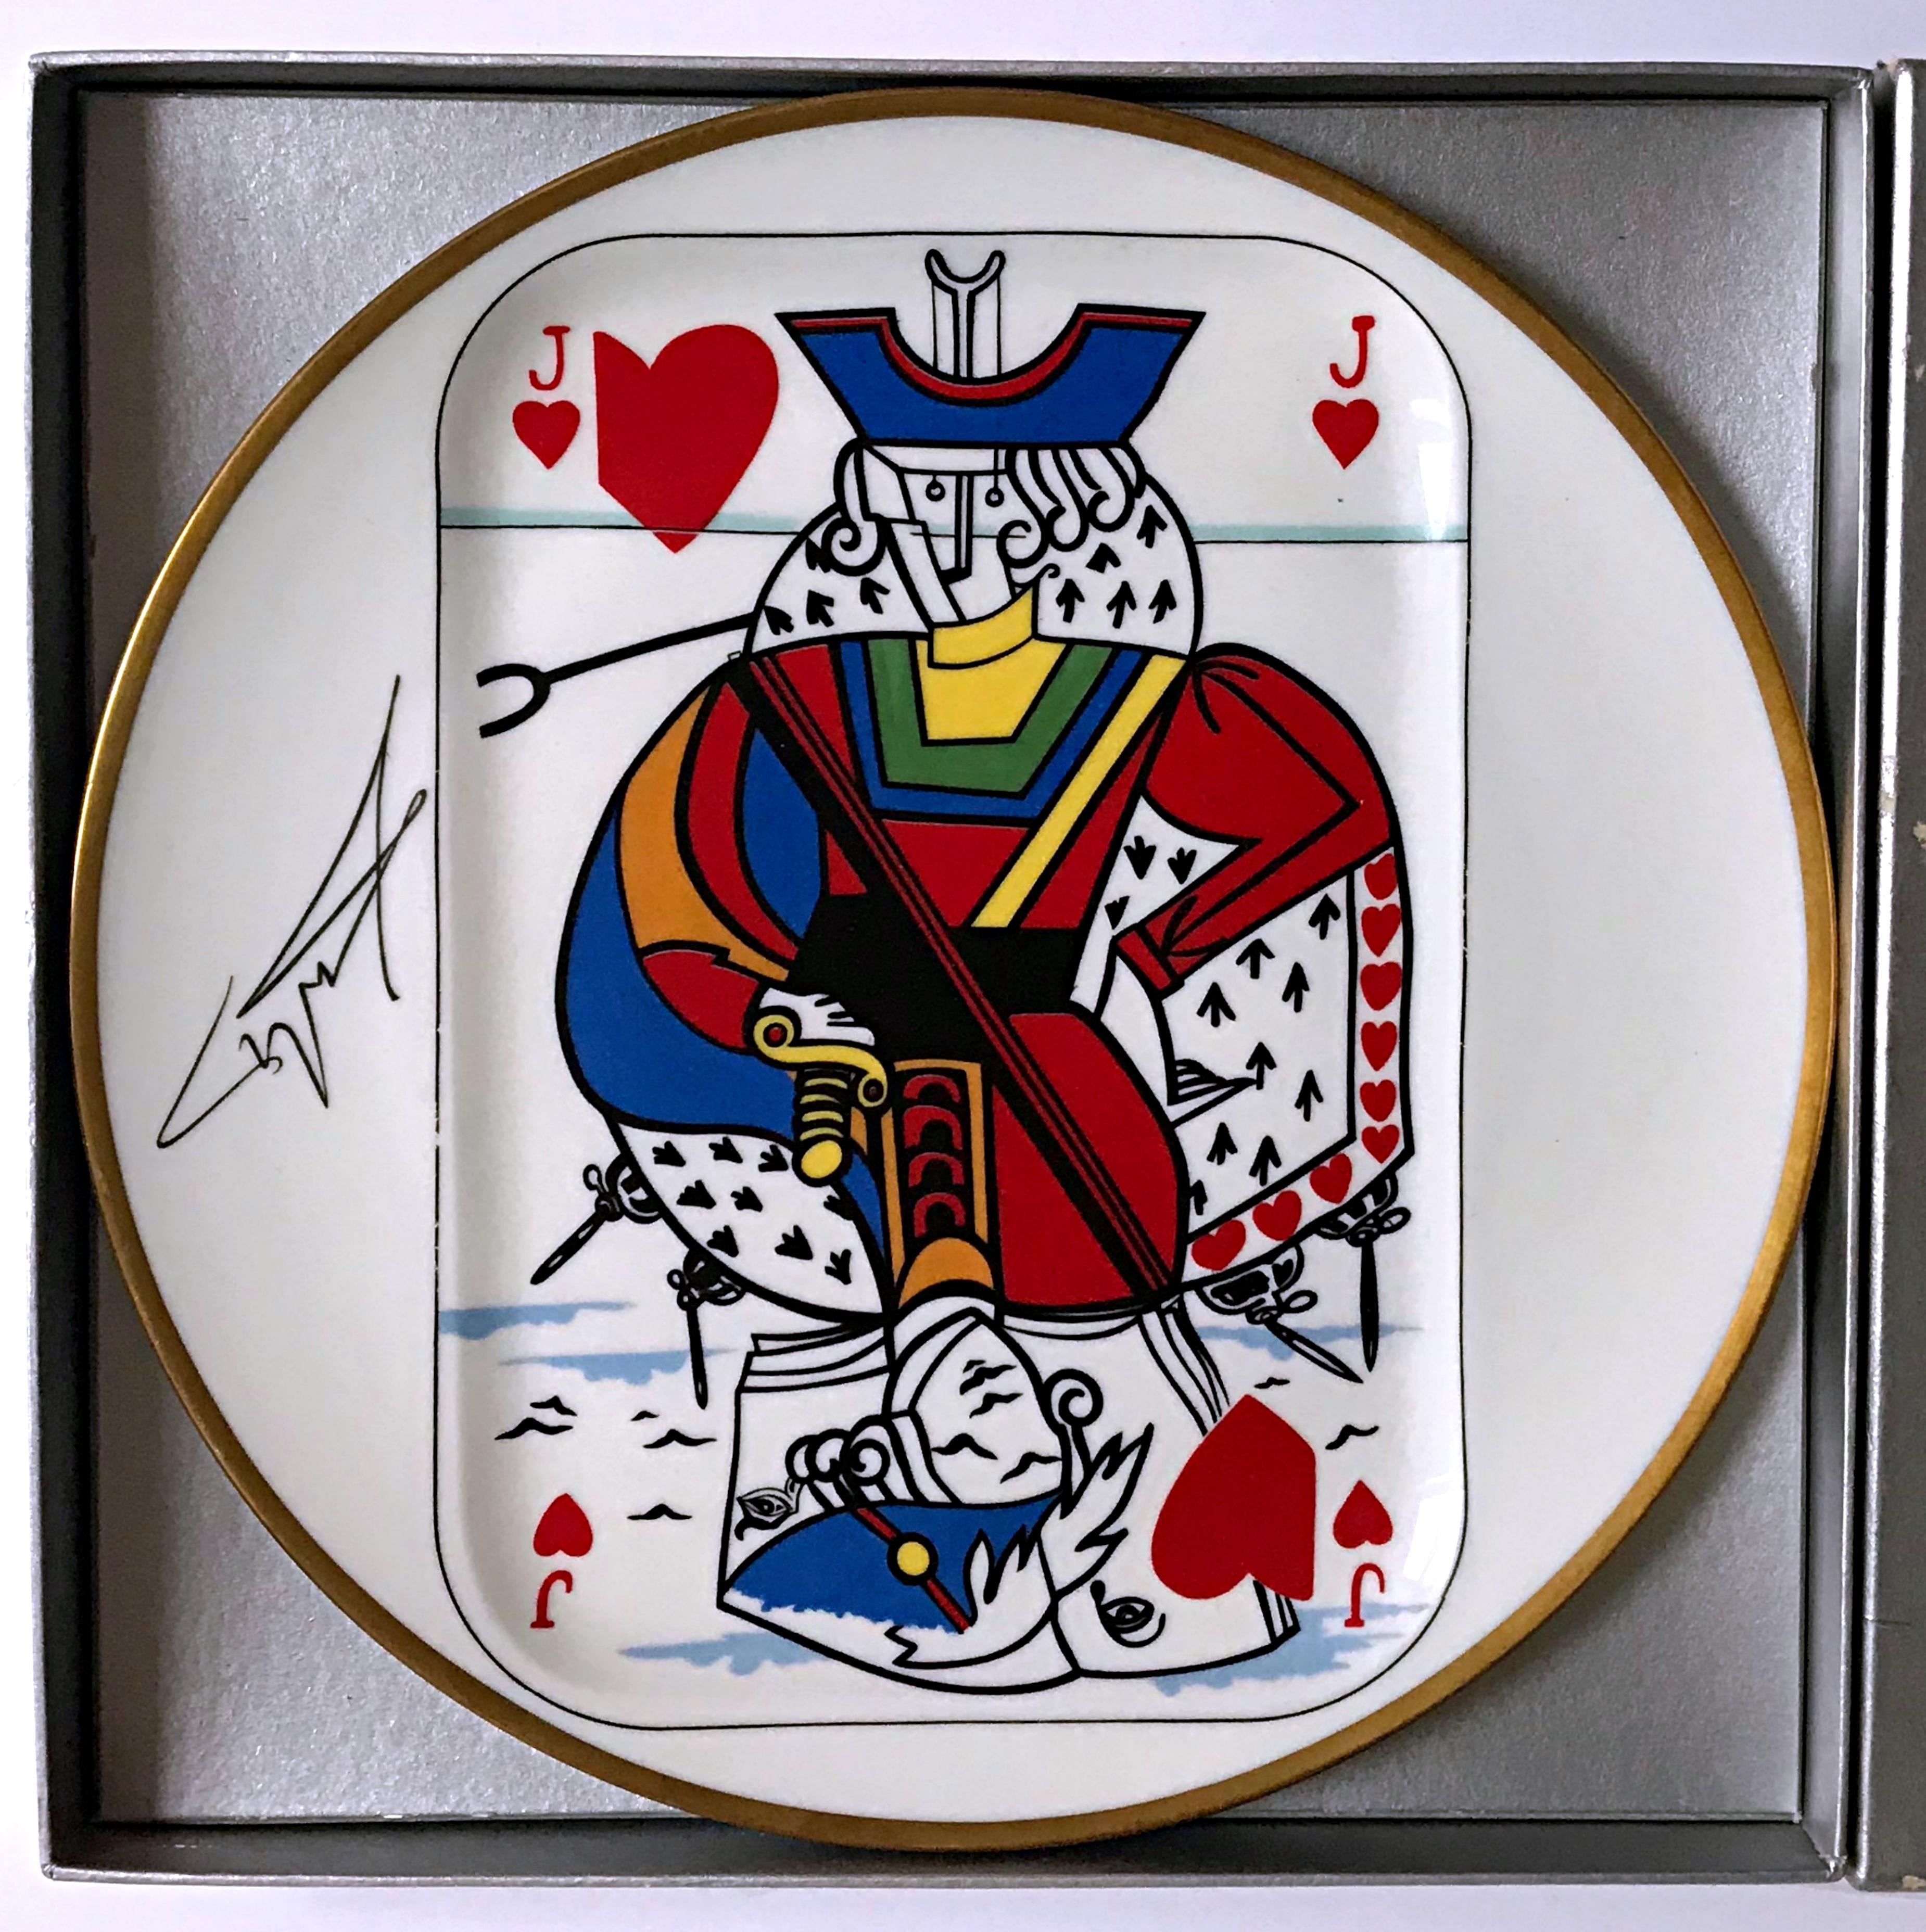 Jack of Hearts - limited edition porcelain plate made in France  - Surrealist Sculpture by Salvador Dalí